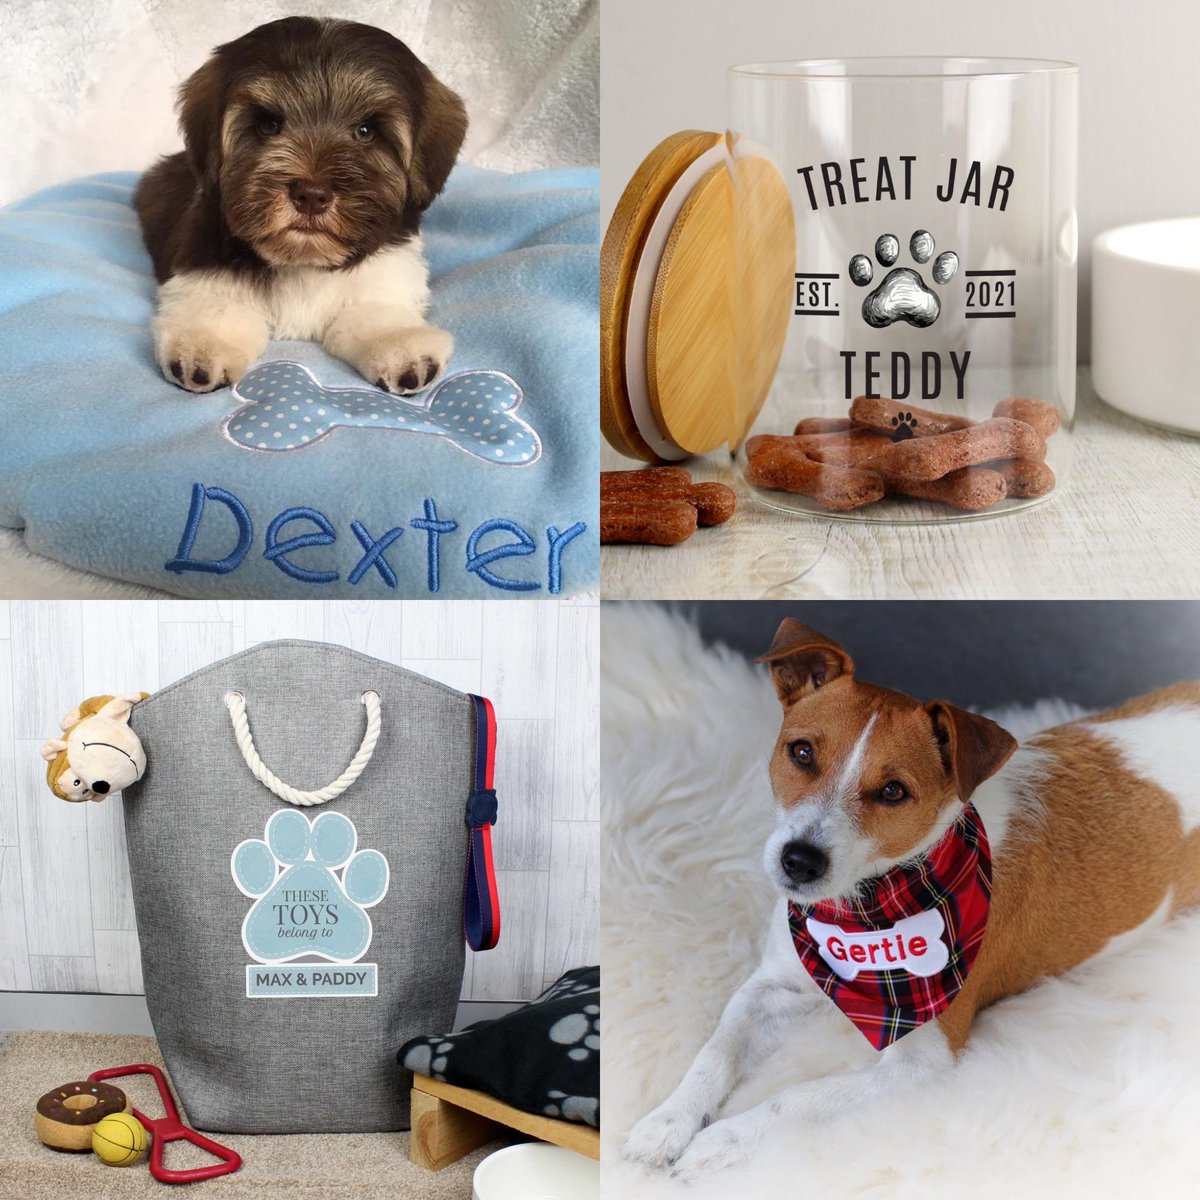 We’re just in love with these gorgeous personalised dog accessories from @myposhpaws From snuggly blankets to treat jars, dog towels to toy storage bags, their products make the perfect #gift for #dogs and #doglovers dotty4paws.co.uk/businesses/lis… #Earlybiz #MHHSBD